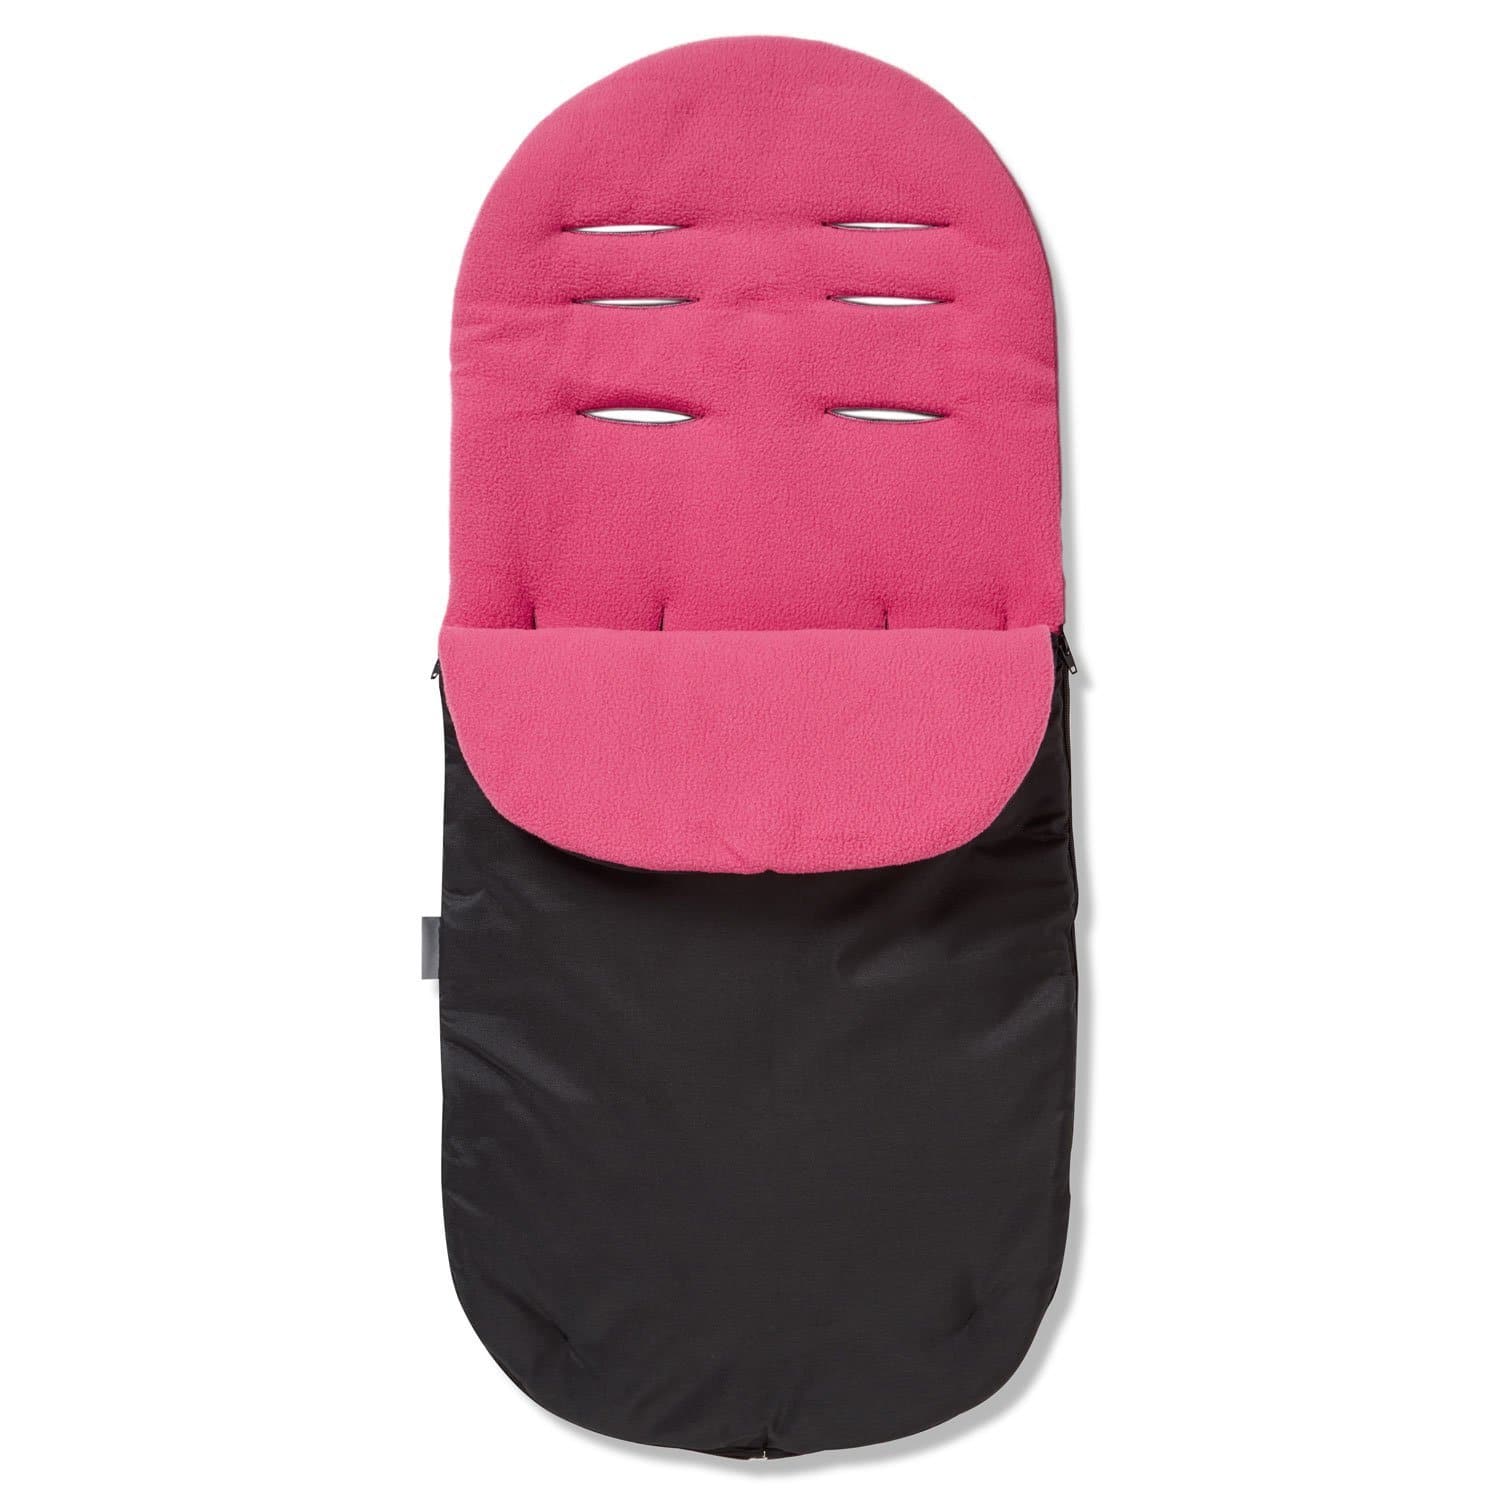 Footmuff / Cosy Toes Compatible with Babyzen - Dark Pink / Fits All Models | For Your Little One